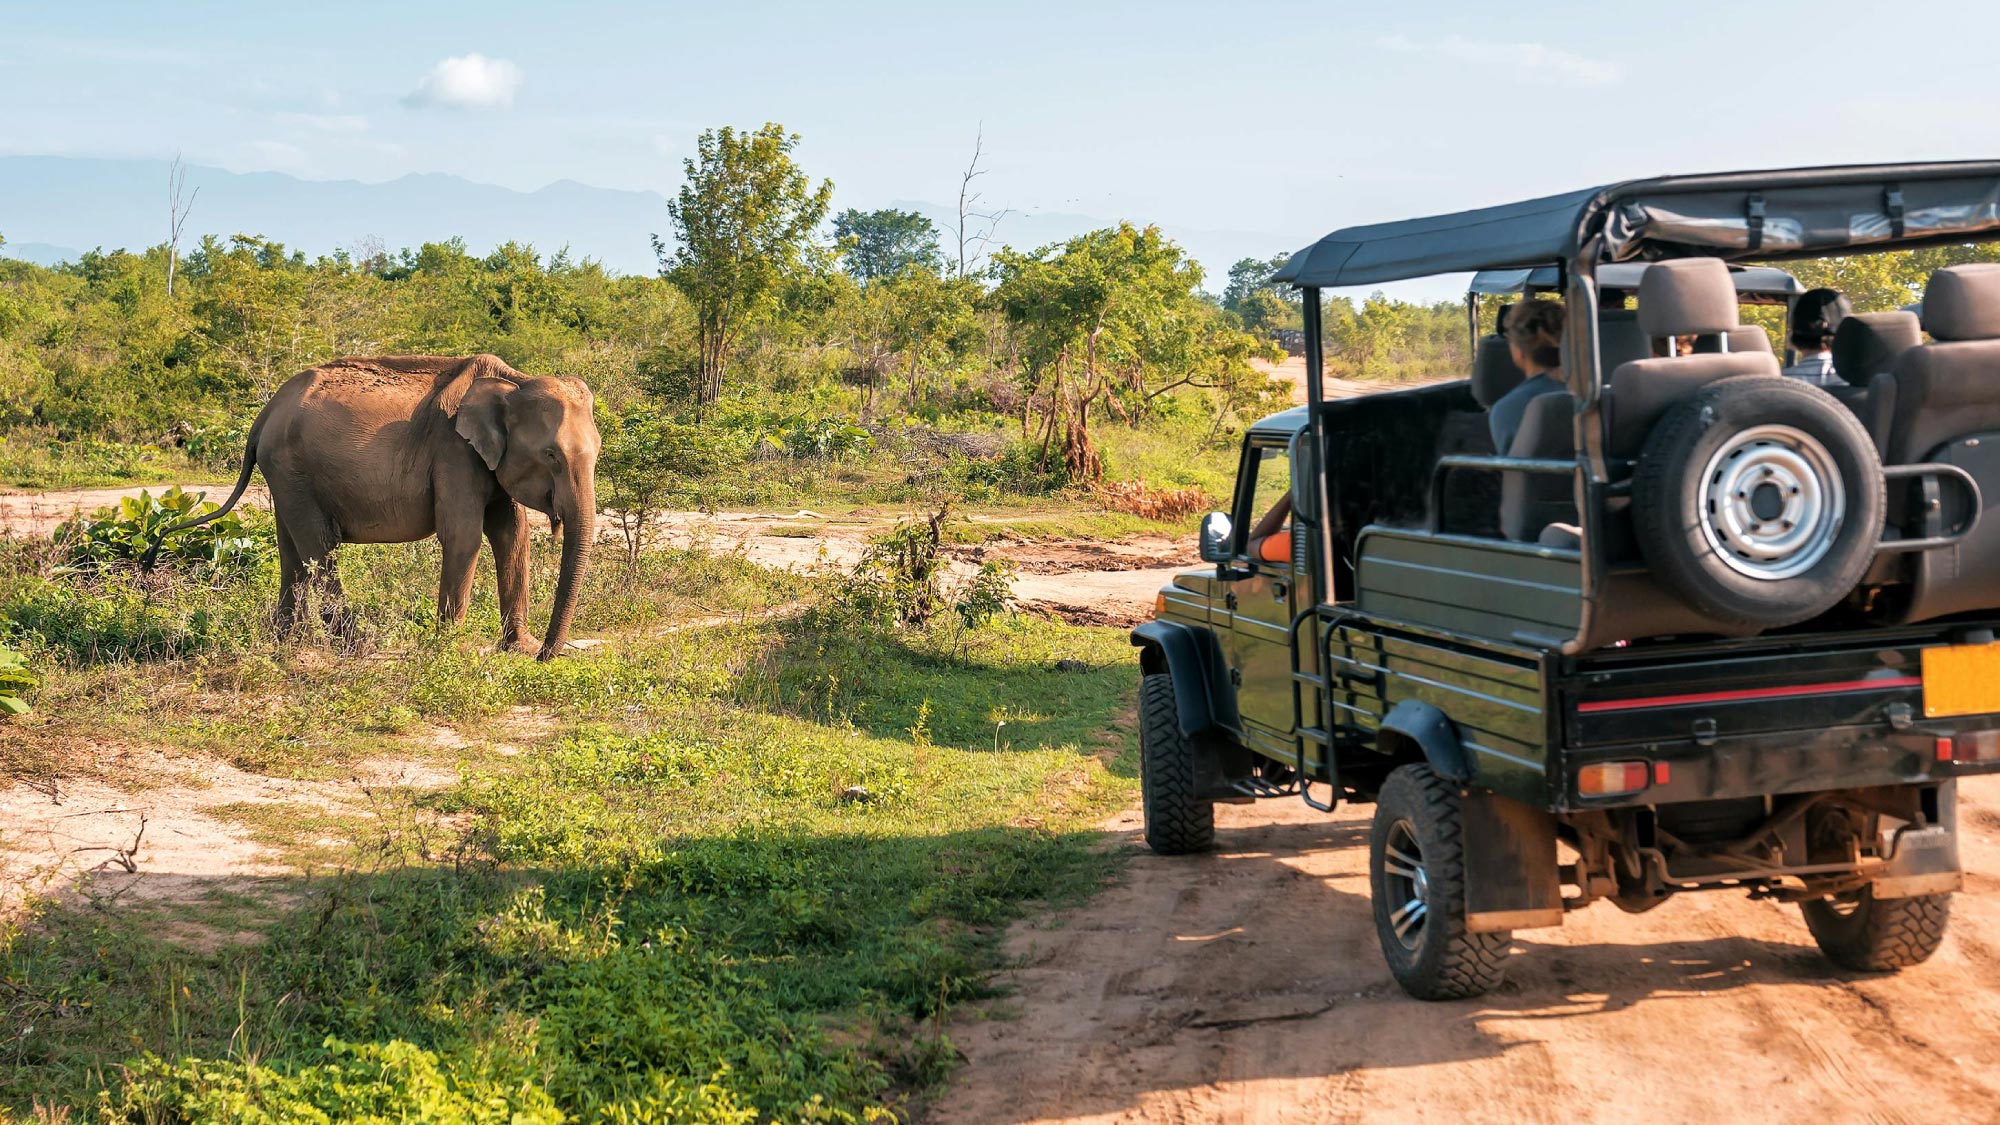 Embark on an exhilarating game drive in Yala National Park, Sri Lanka, to spot leopards, bears, and elephants. A highlight of your journey to Australia, visiting 21 countries, for airplane-owning travelers.